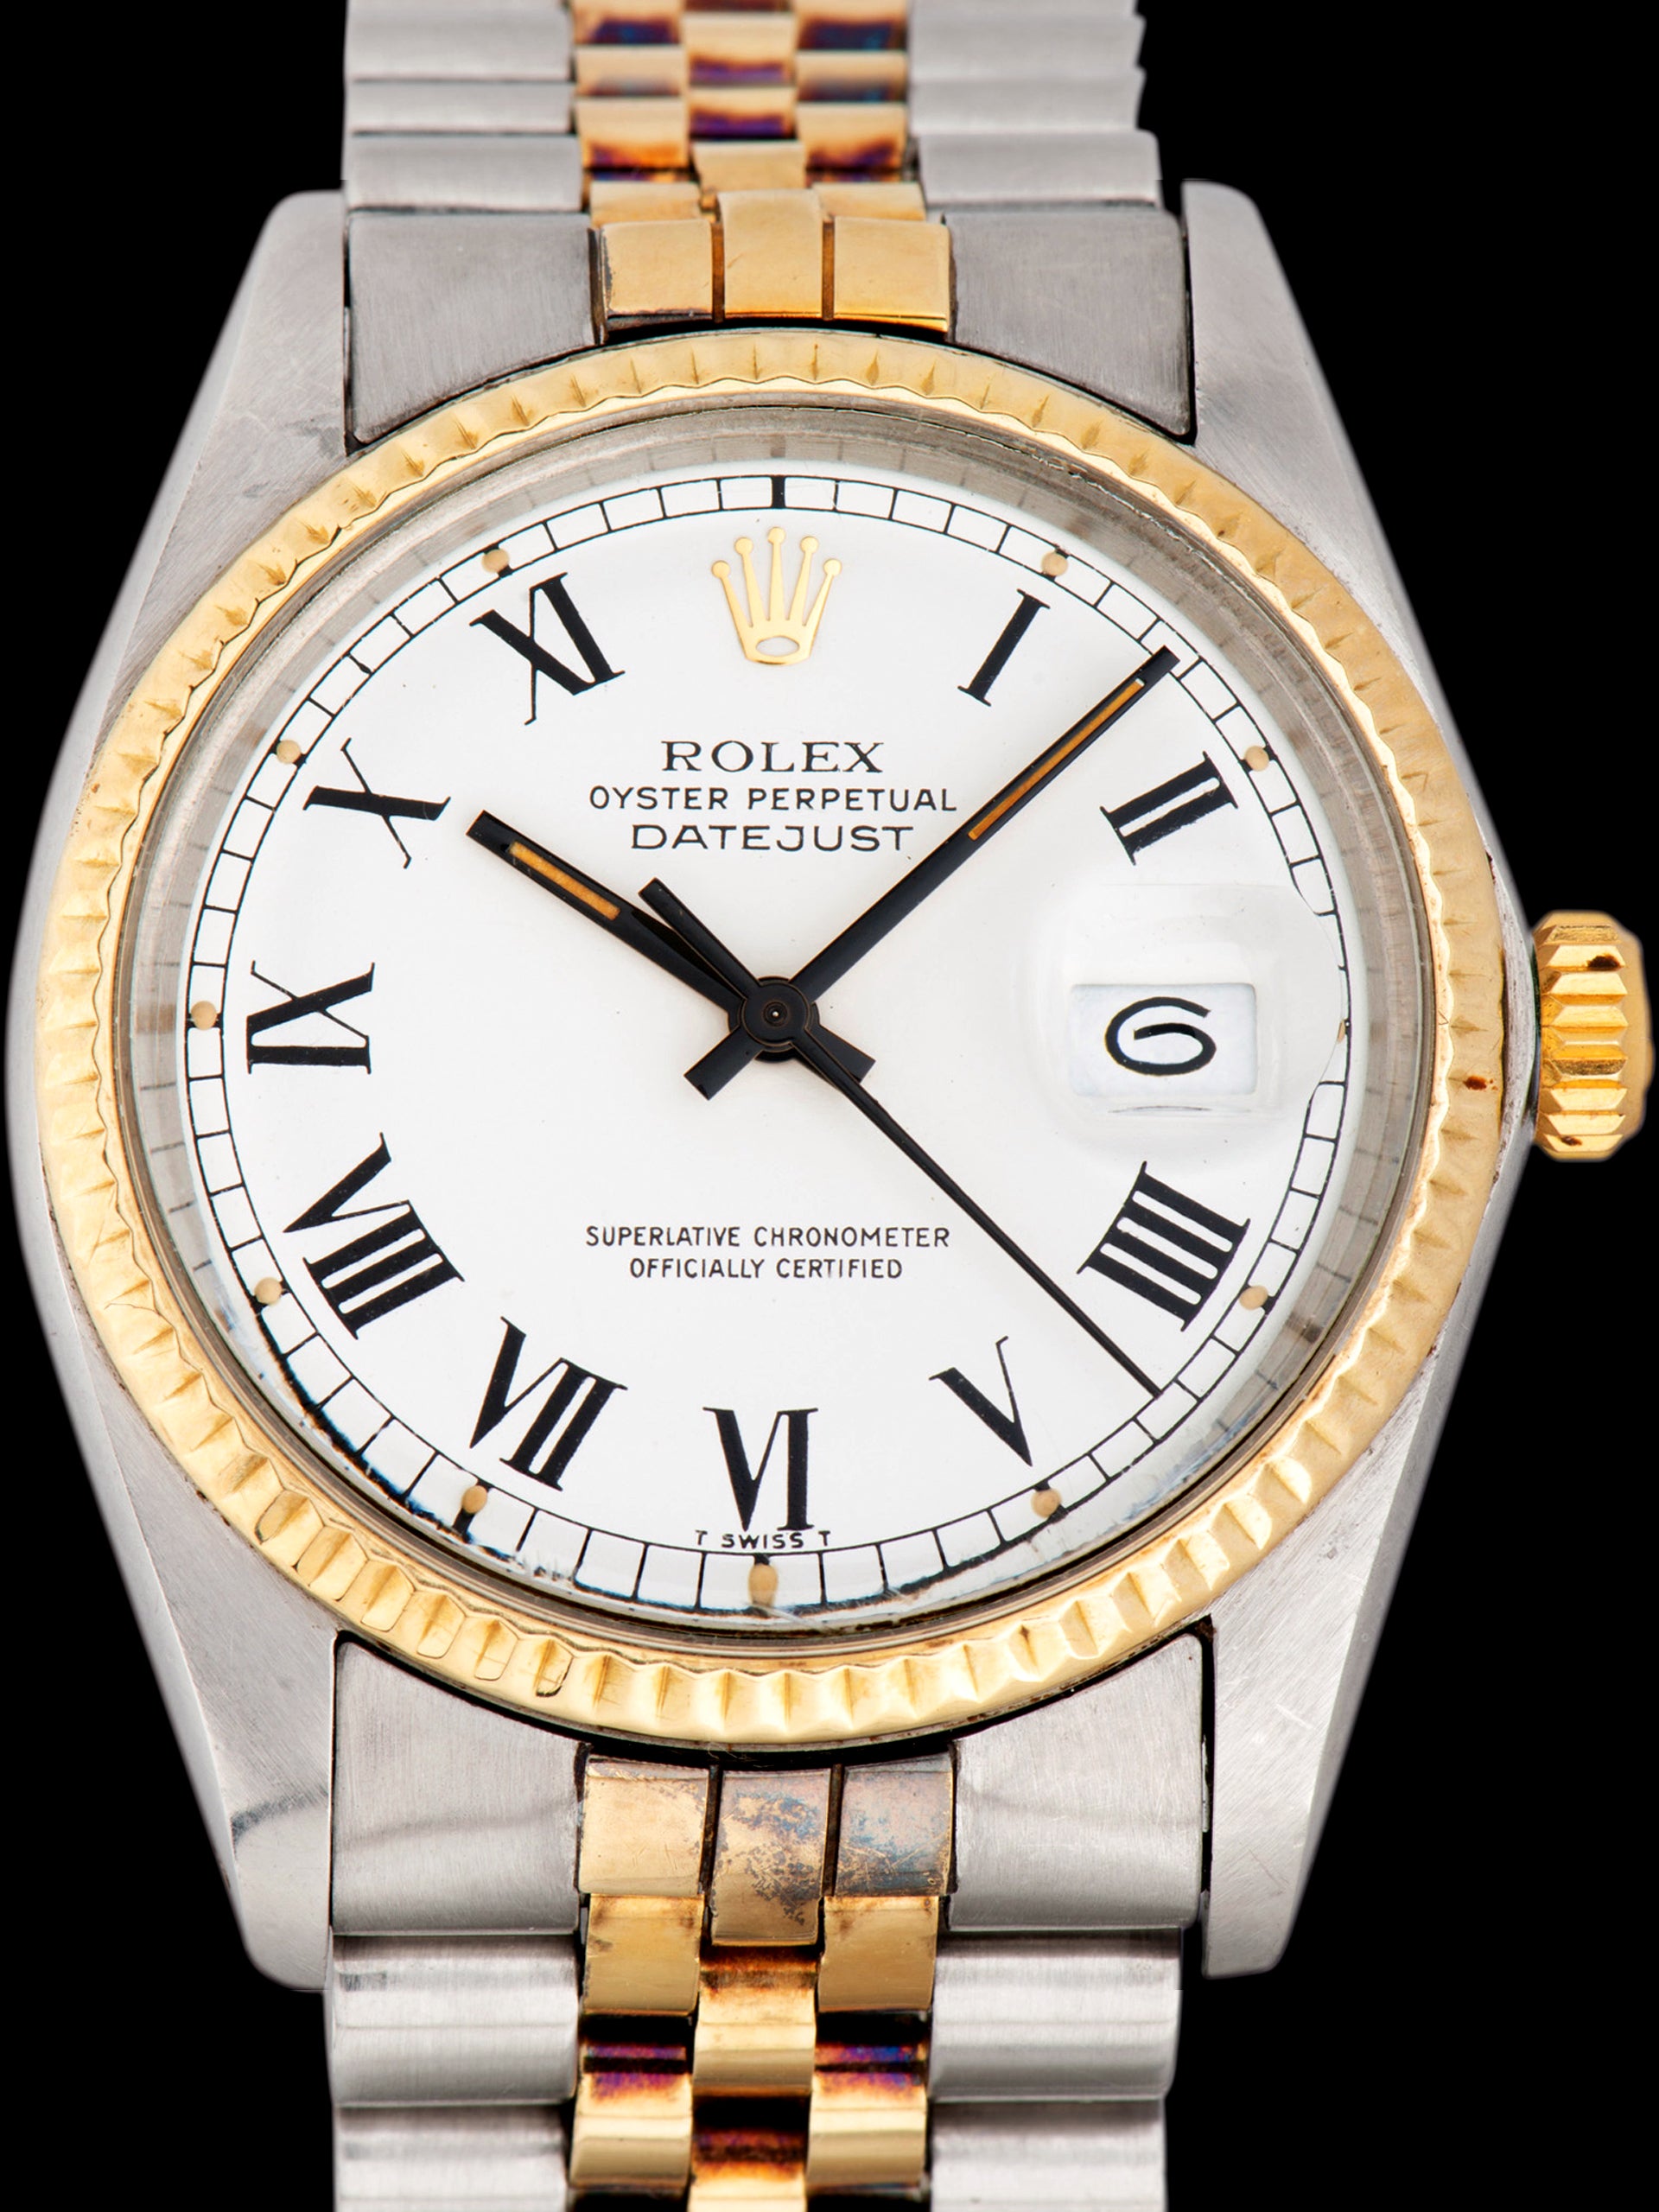 1979 Rolex Two-Tone Datejust (Ref. 16013) "Buckley Dial"